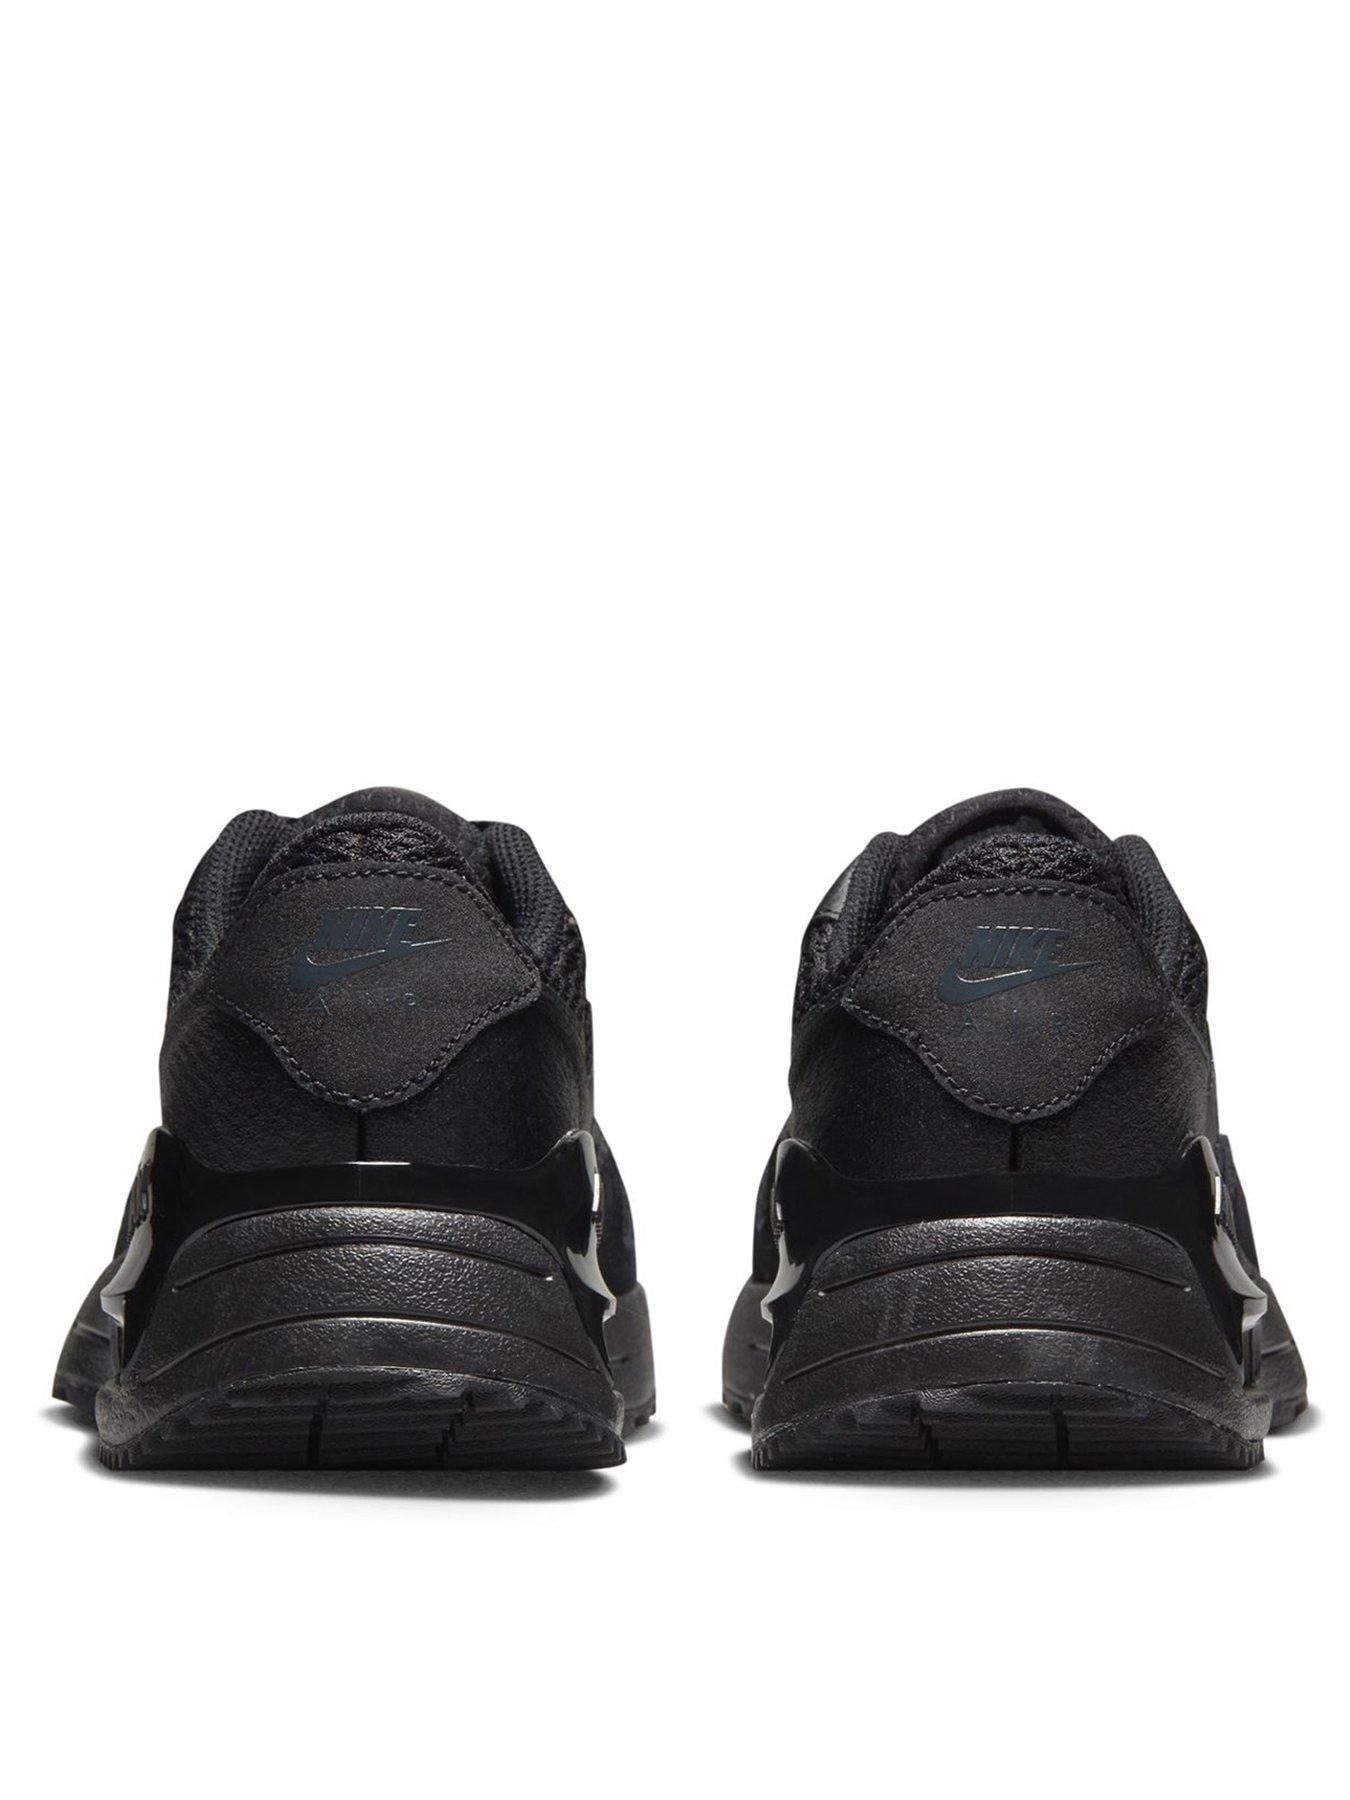 Nike Air Max Systm Junior Unisex Trainers - Black | very.co.uk